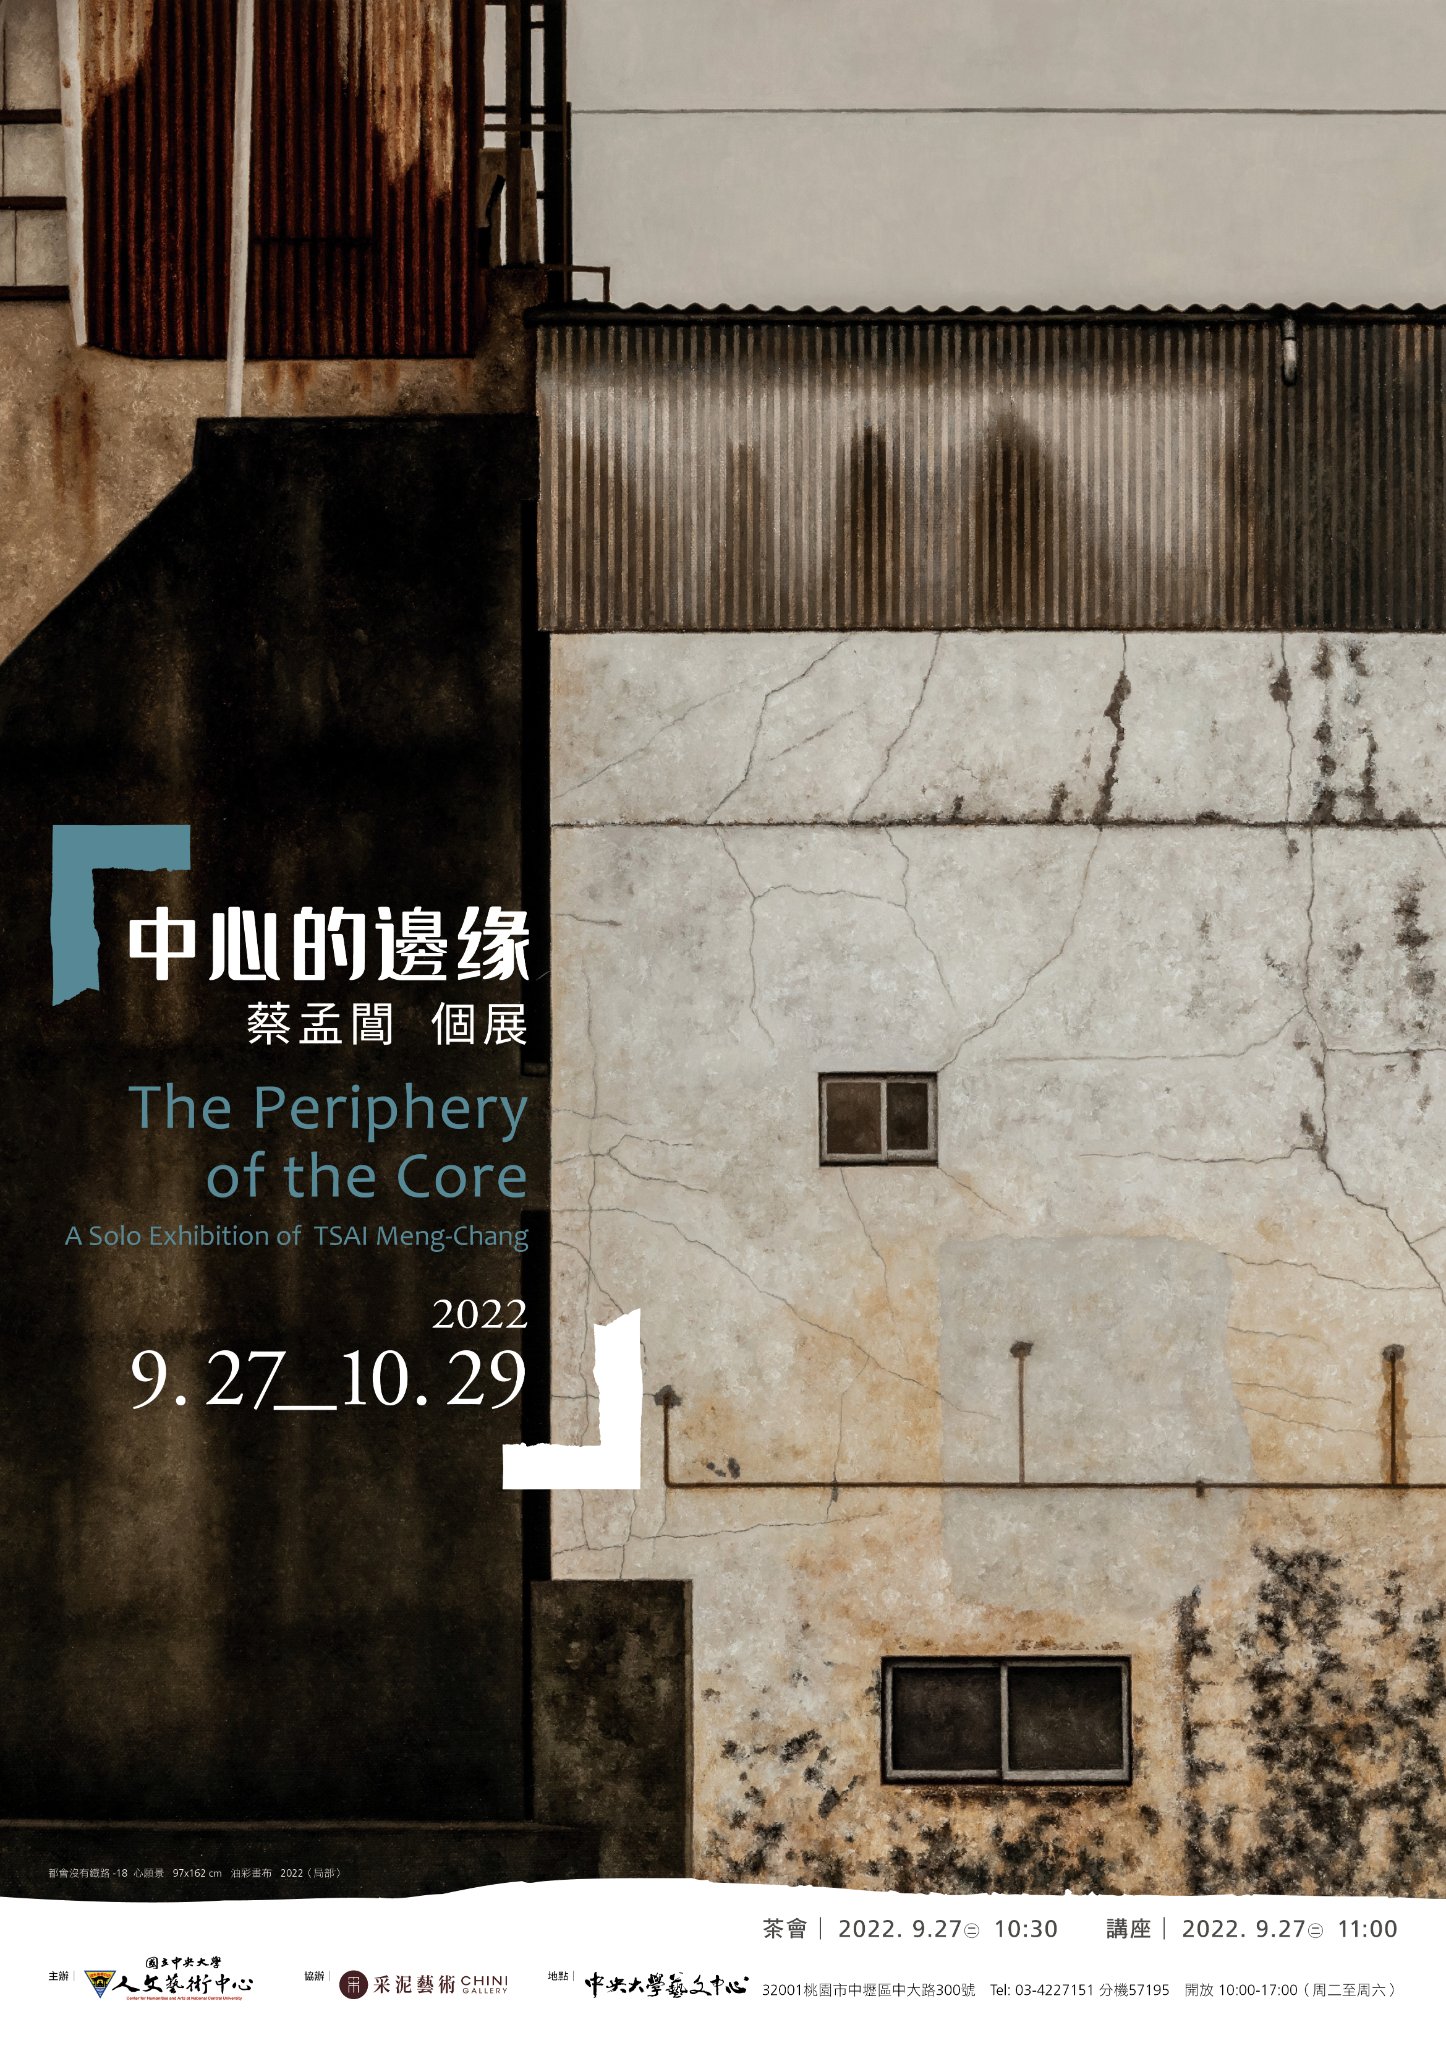 The periphery of the core - A Solo Exhibition of TSAI Meng-Chang